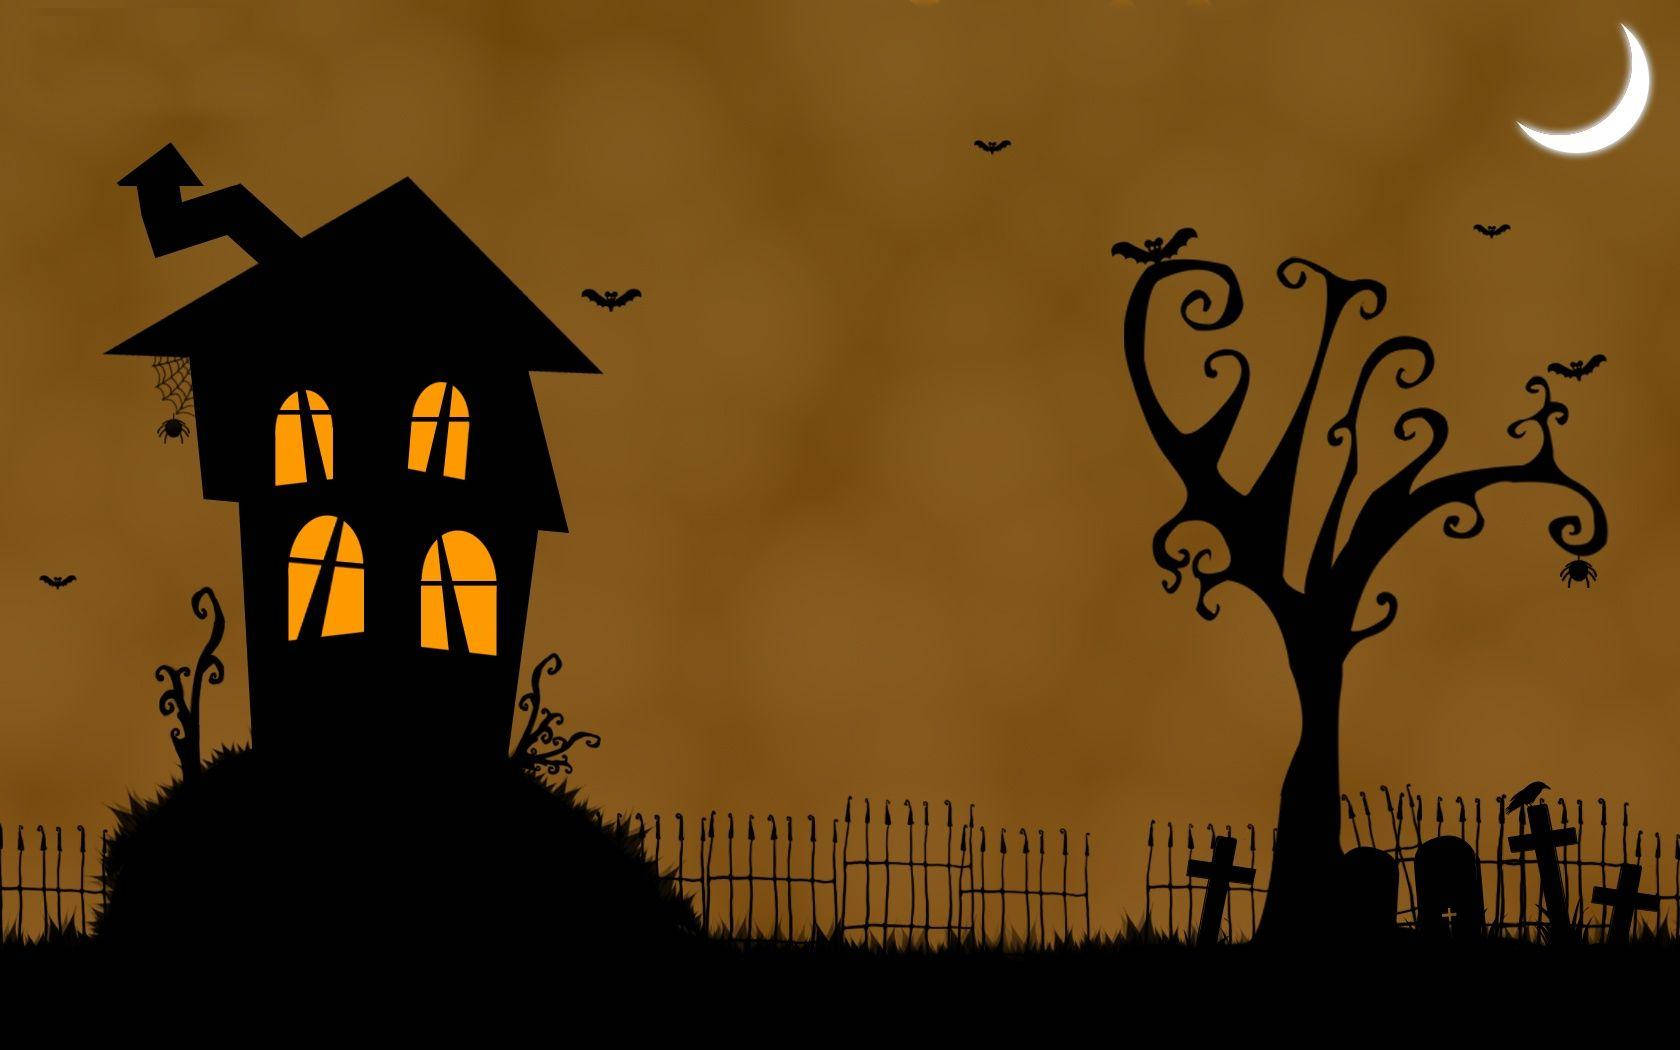 Celebrate Halloween with a spine-chilling visit to a Haunted House! Wallpaper